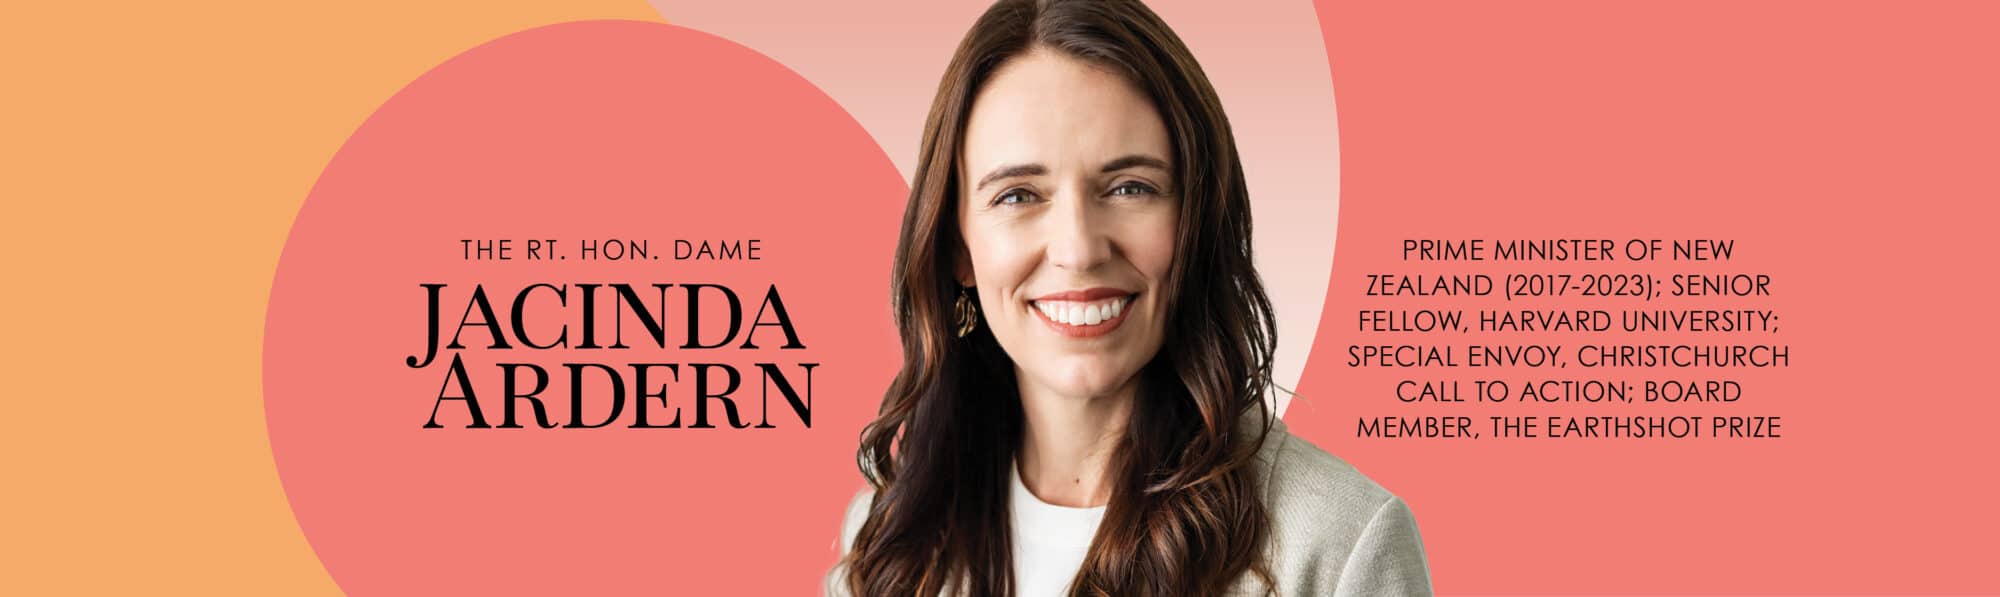 Join The Right Honourable Dame Jacinda Ardern at the California Conference for Women this February 29th!